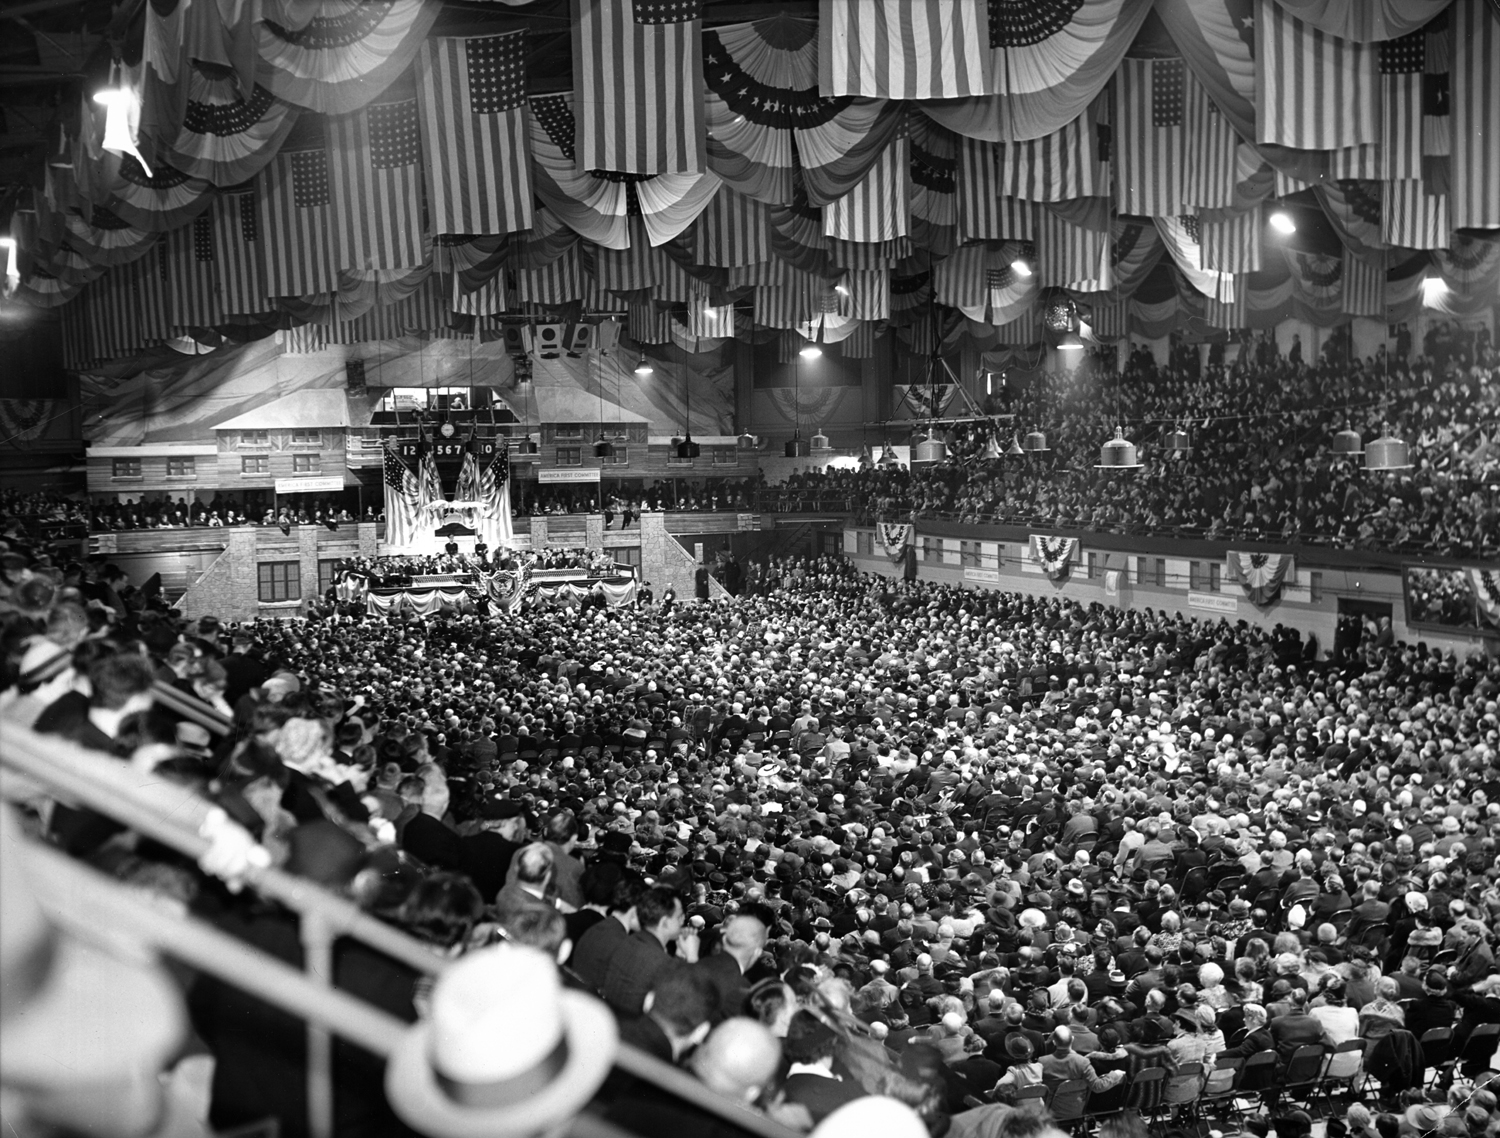 Crowd of 10,000 at an "America First Committee" rally listening to speeches promulgating isolationism and urging the cutting off of aid to Britain, Chicago Arena, 1941